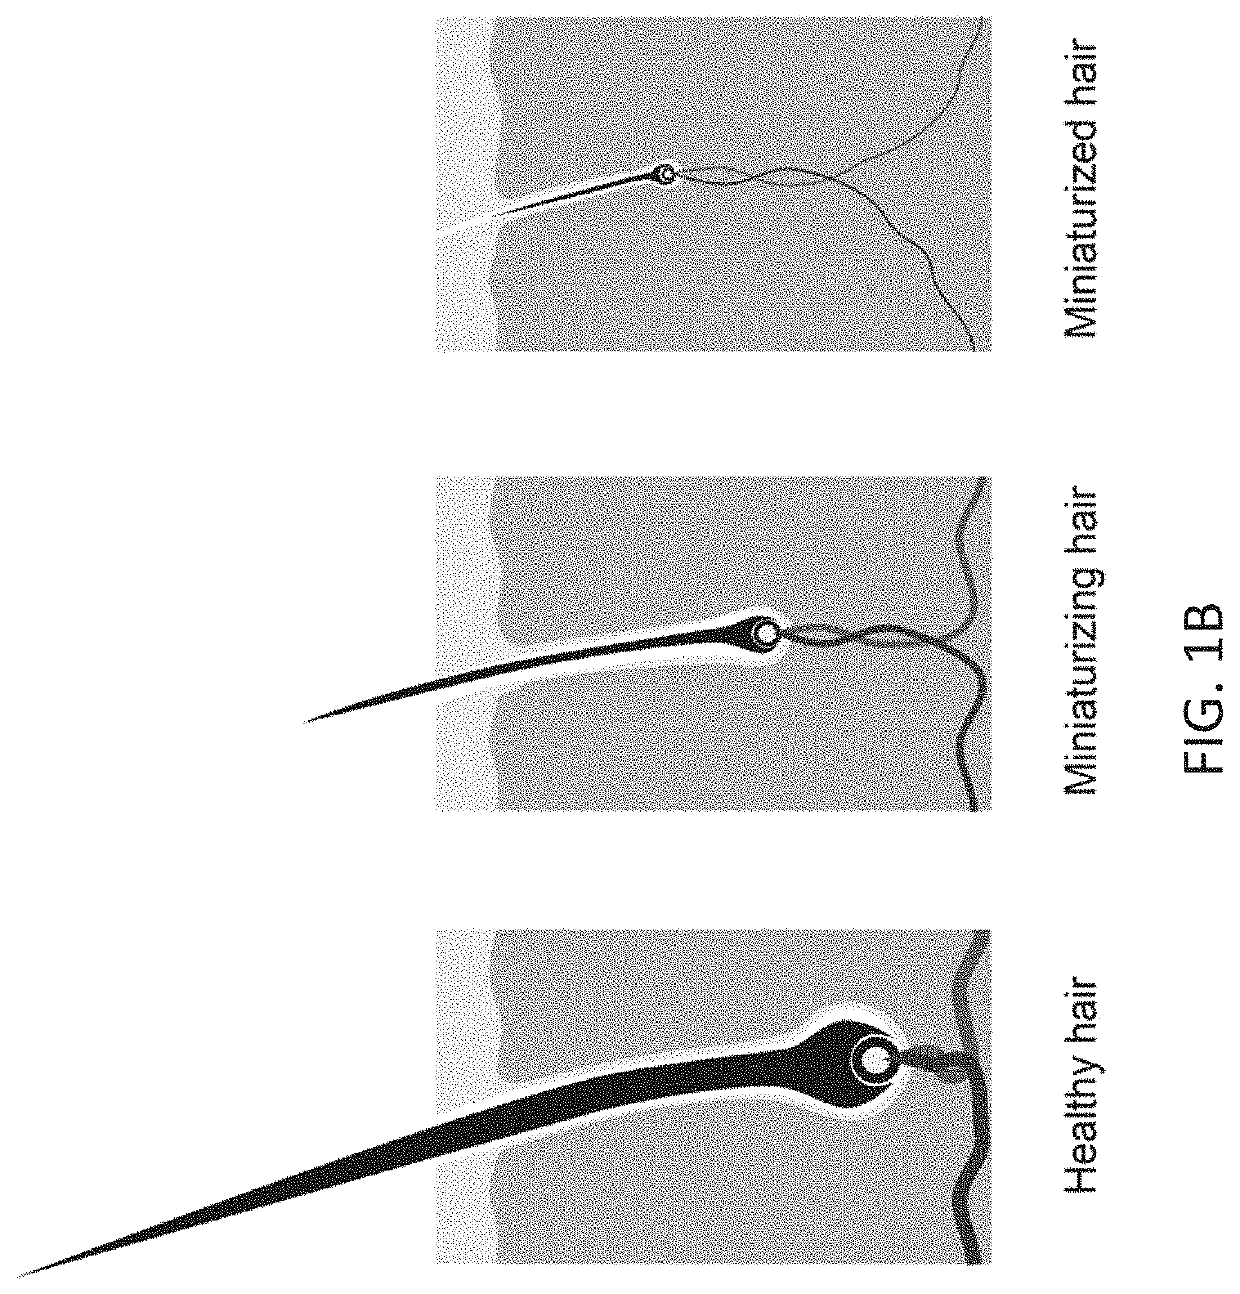 Cranial hair loss treatment using micro-energy acoustic shock wave devices and methods